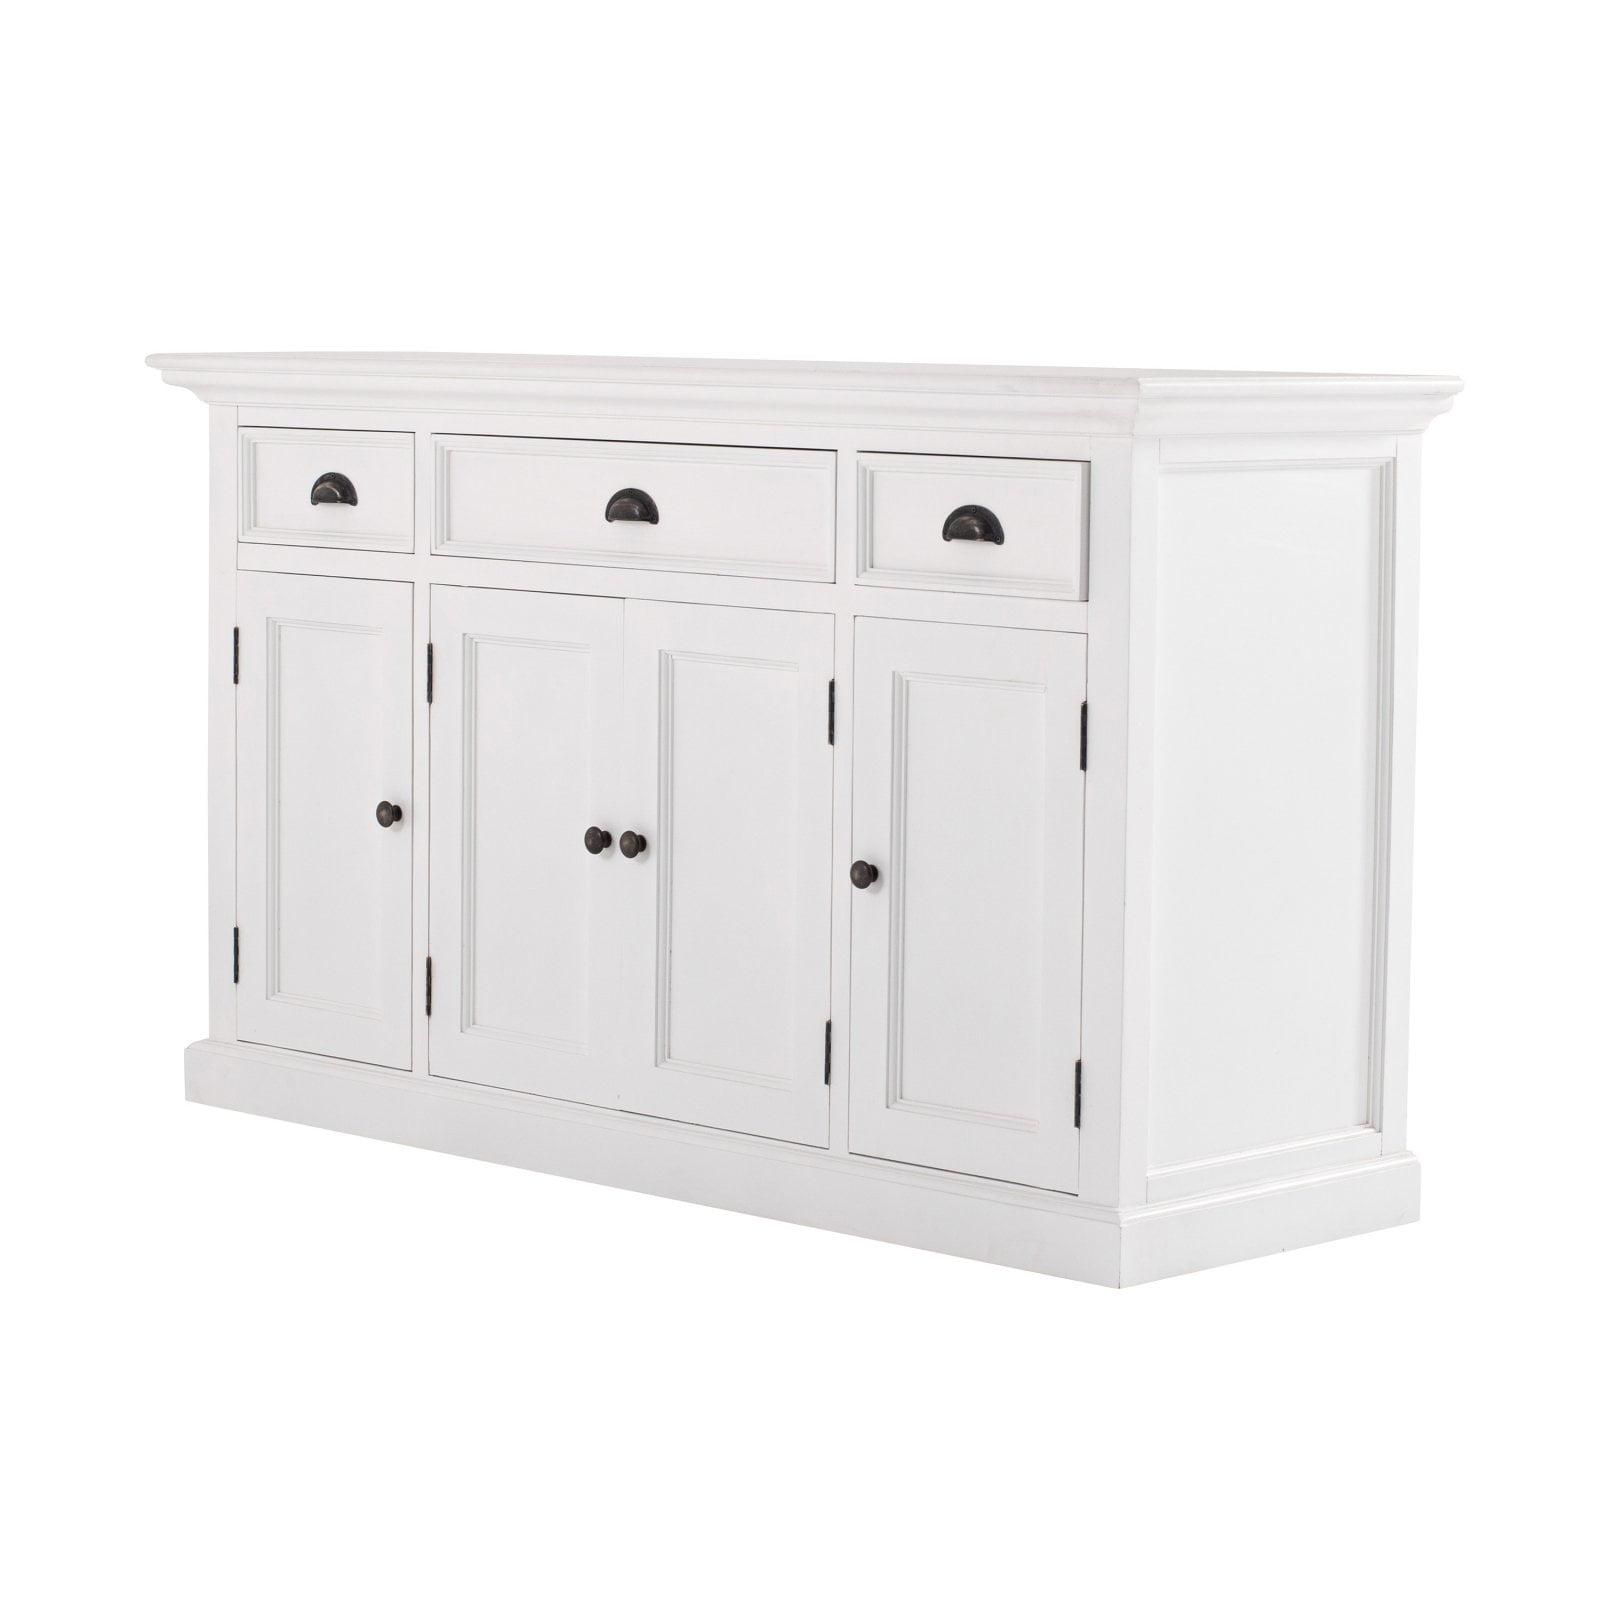 Classic White Halifax Mahogany Buffet with 4 Doors and 3 Drawers